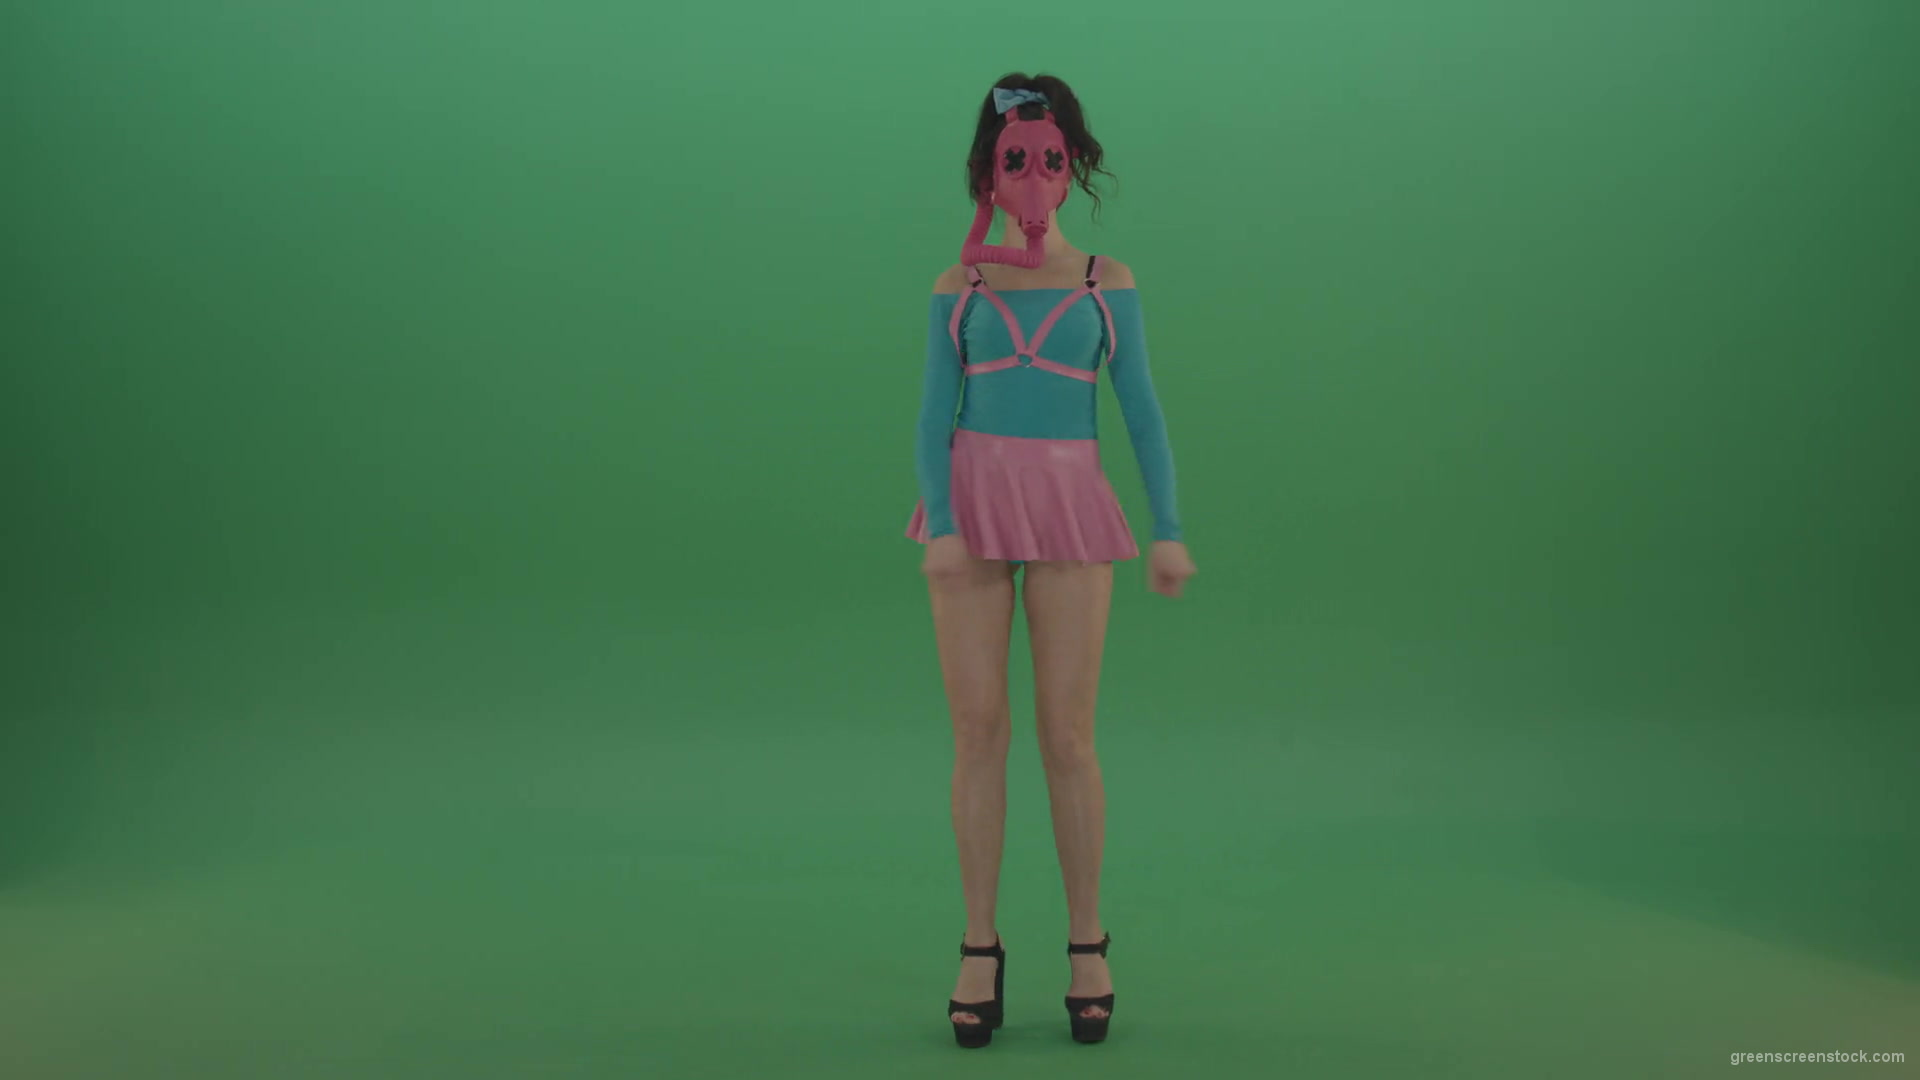 Sexy-Girl-in-Pink-Gas-Mask-marching-isolated-on-Green-Screen-4K-Video-Footage-1920_008 Green Screen Stock